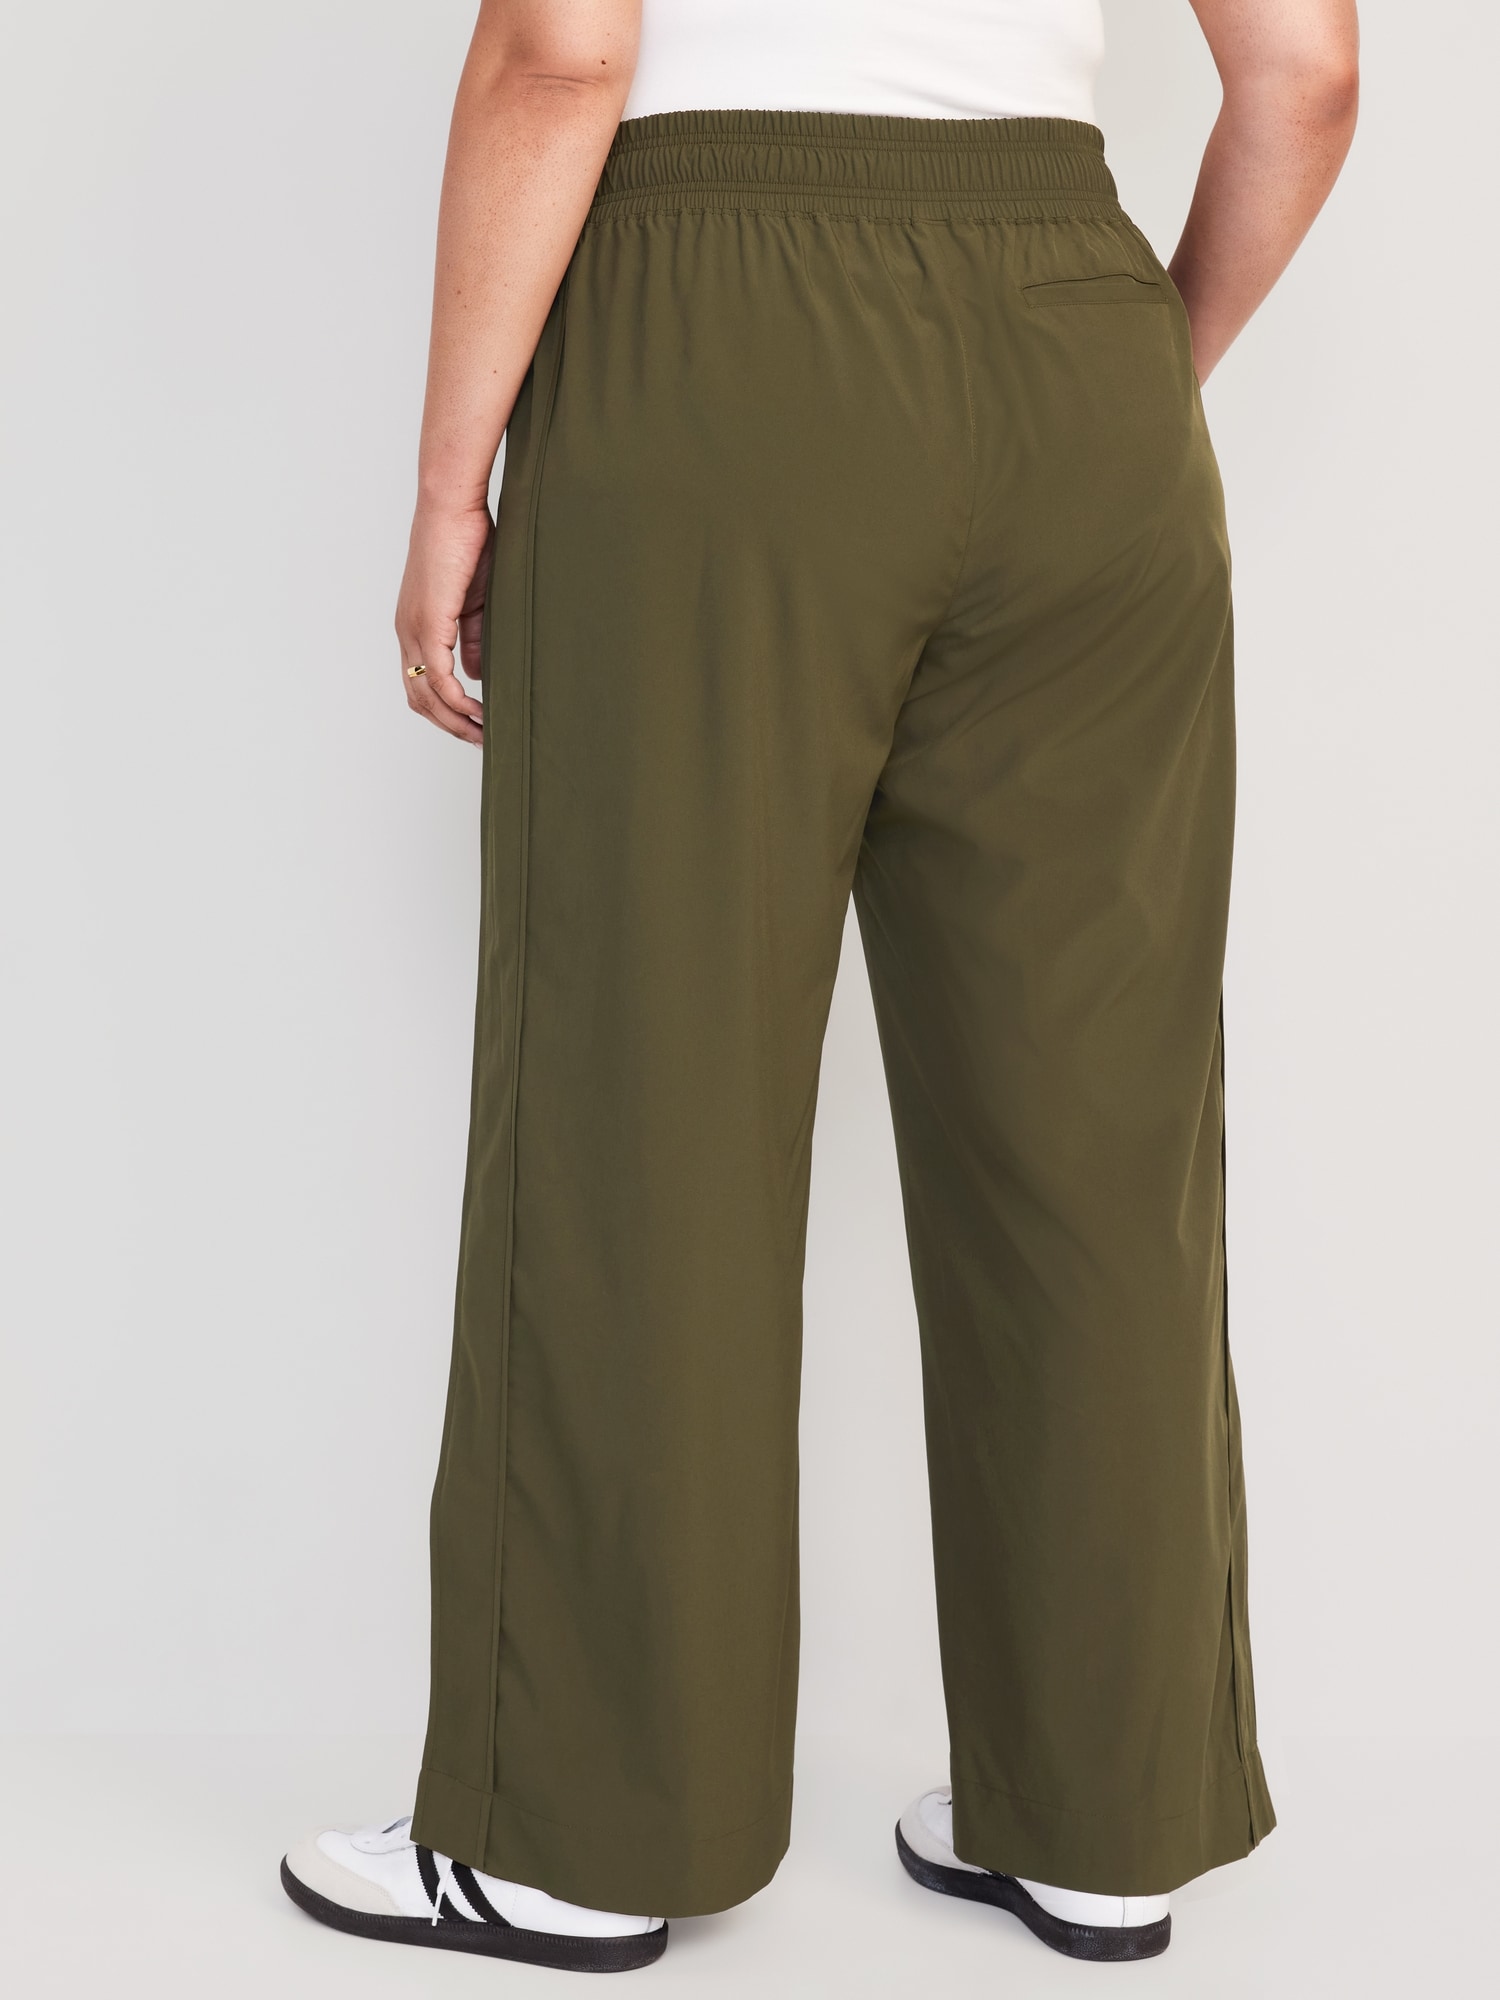 Old Navy High-Waisted StretchTech Wide-Leg Pants for Women